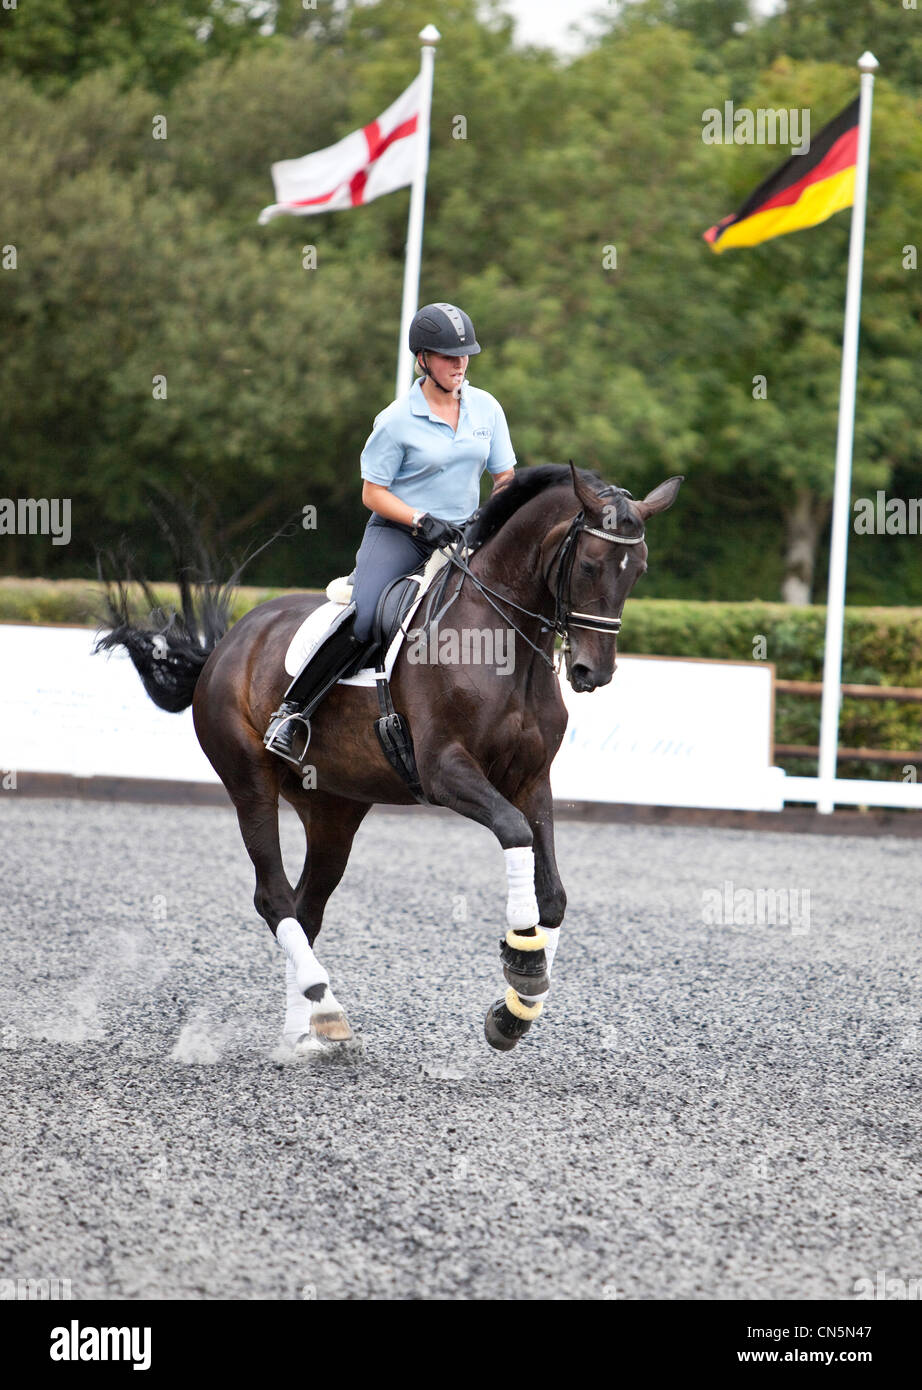 Dressage trainer on a horse training in an outdoor arena, London, England, UK. Stock Photo